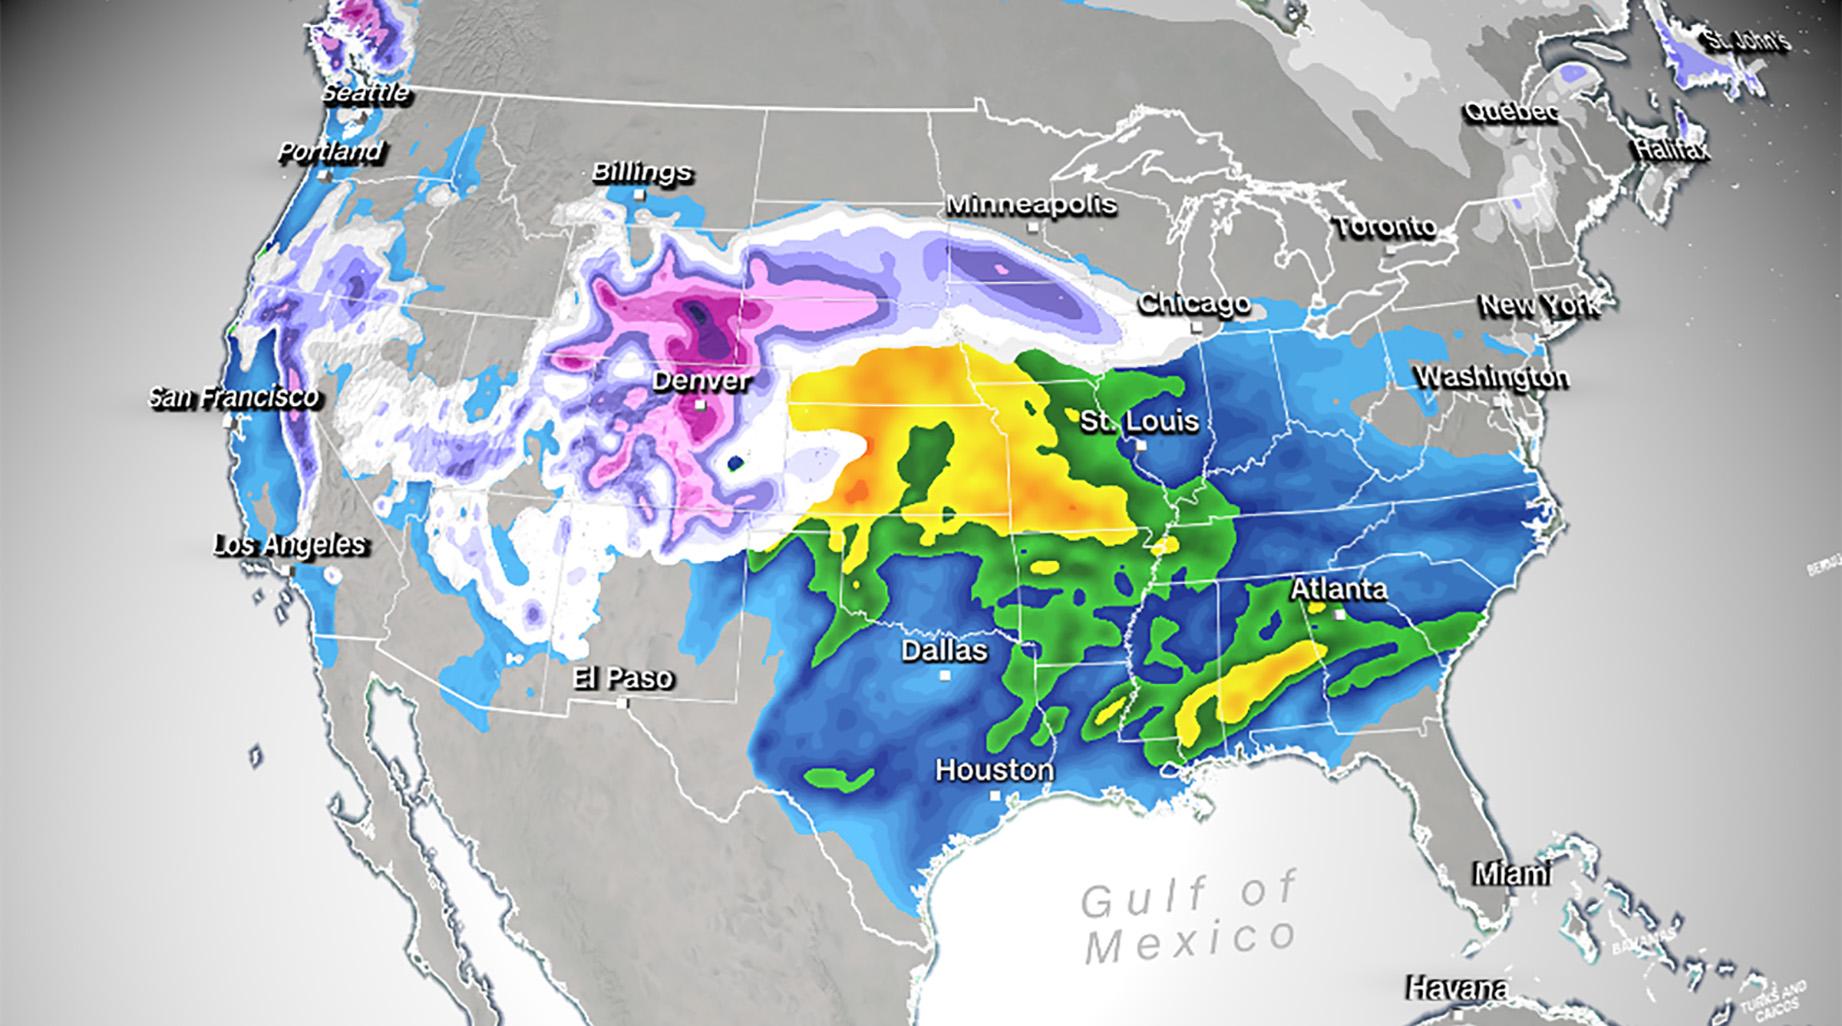 Parts of Wyoming and Nebraska are under blizzard warnings while there are Winter Storm Warnings and Advisories in effect for other parts of the region, CNN meteorologist Tyler Mauldin said.